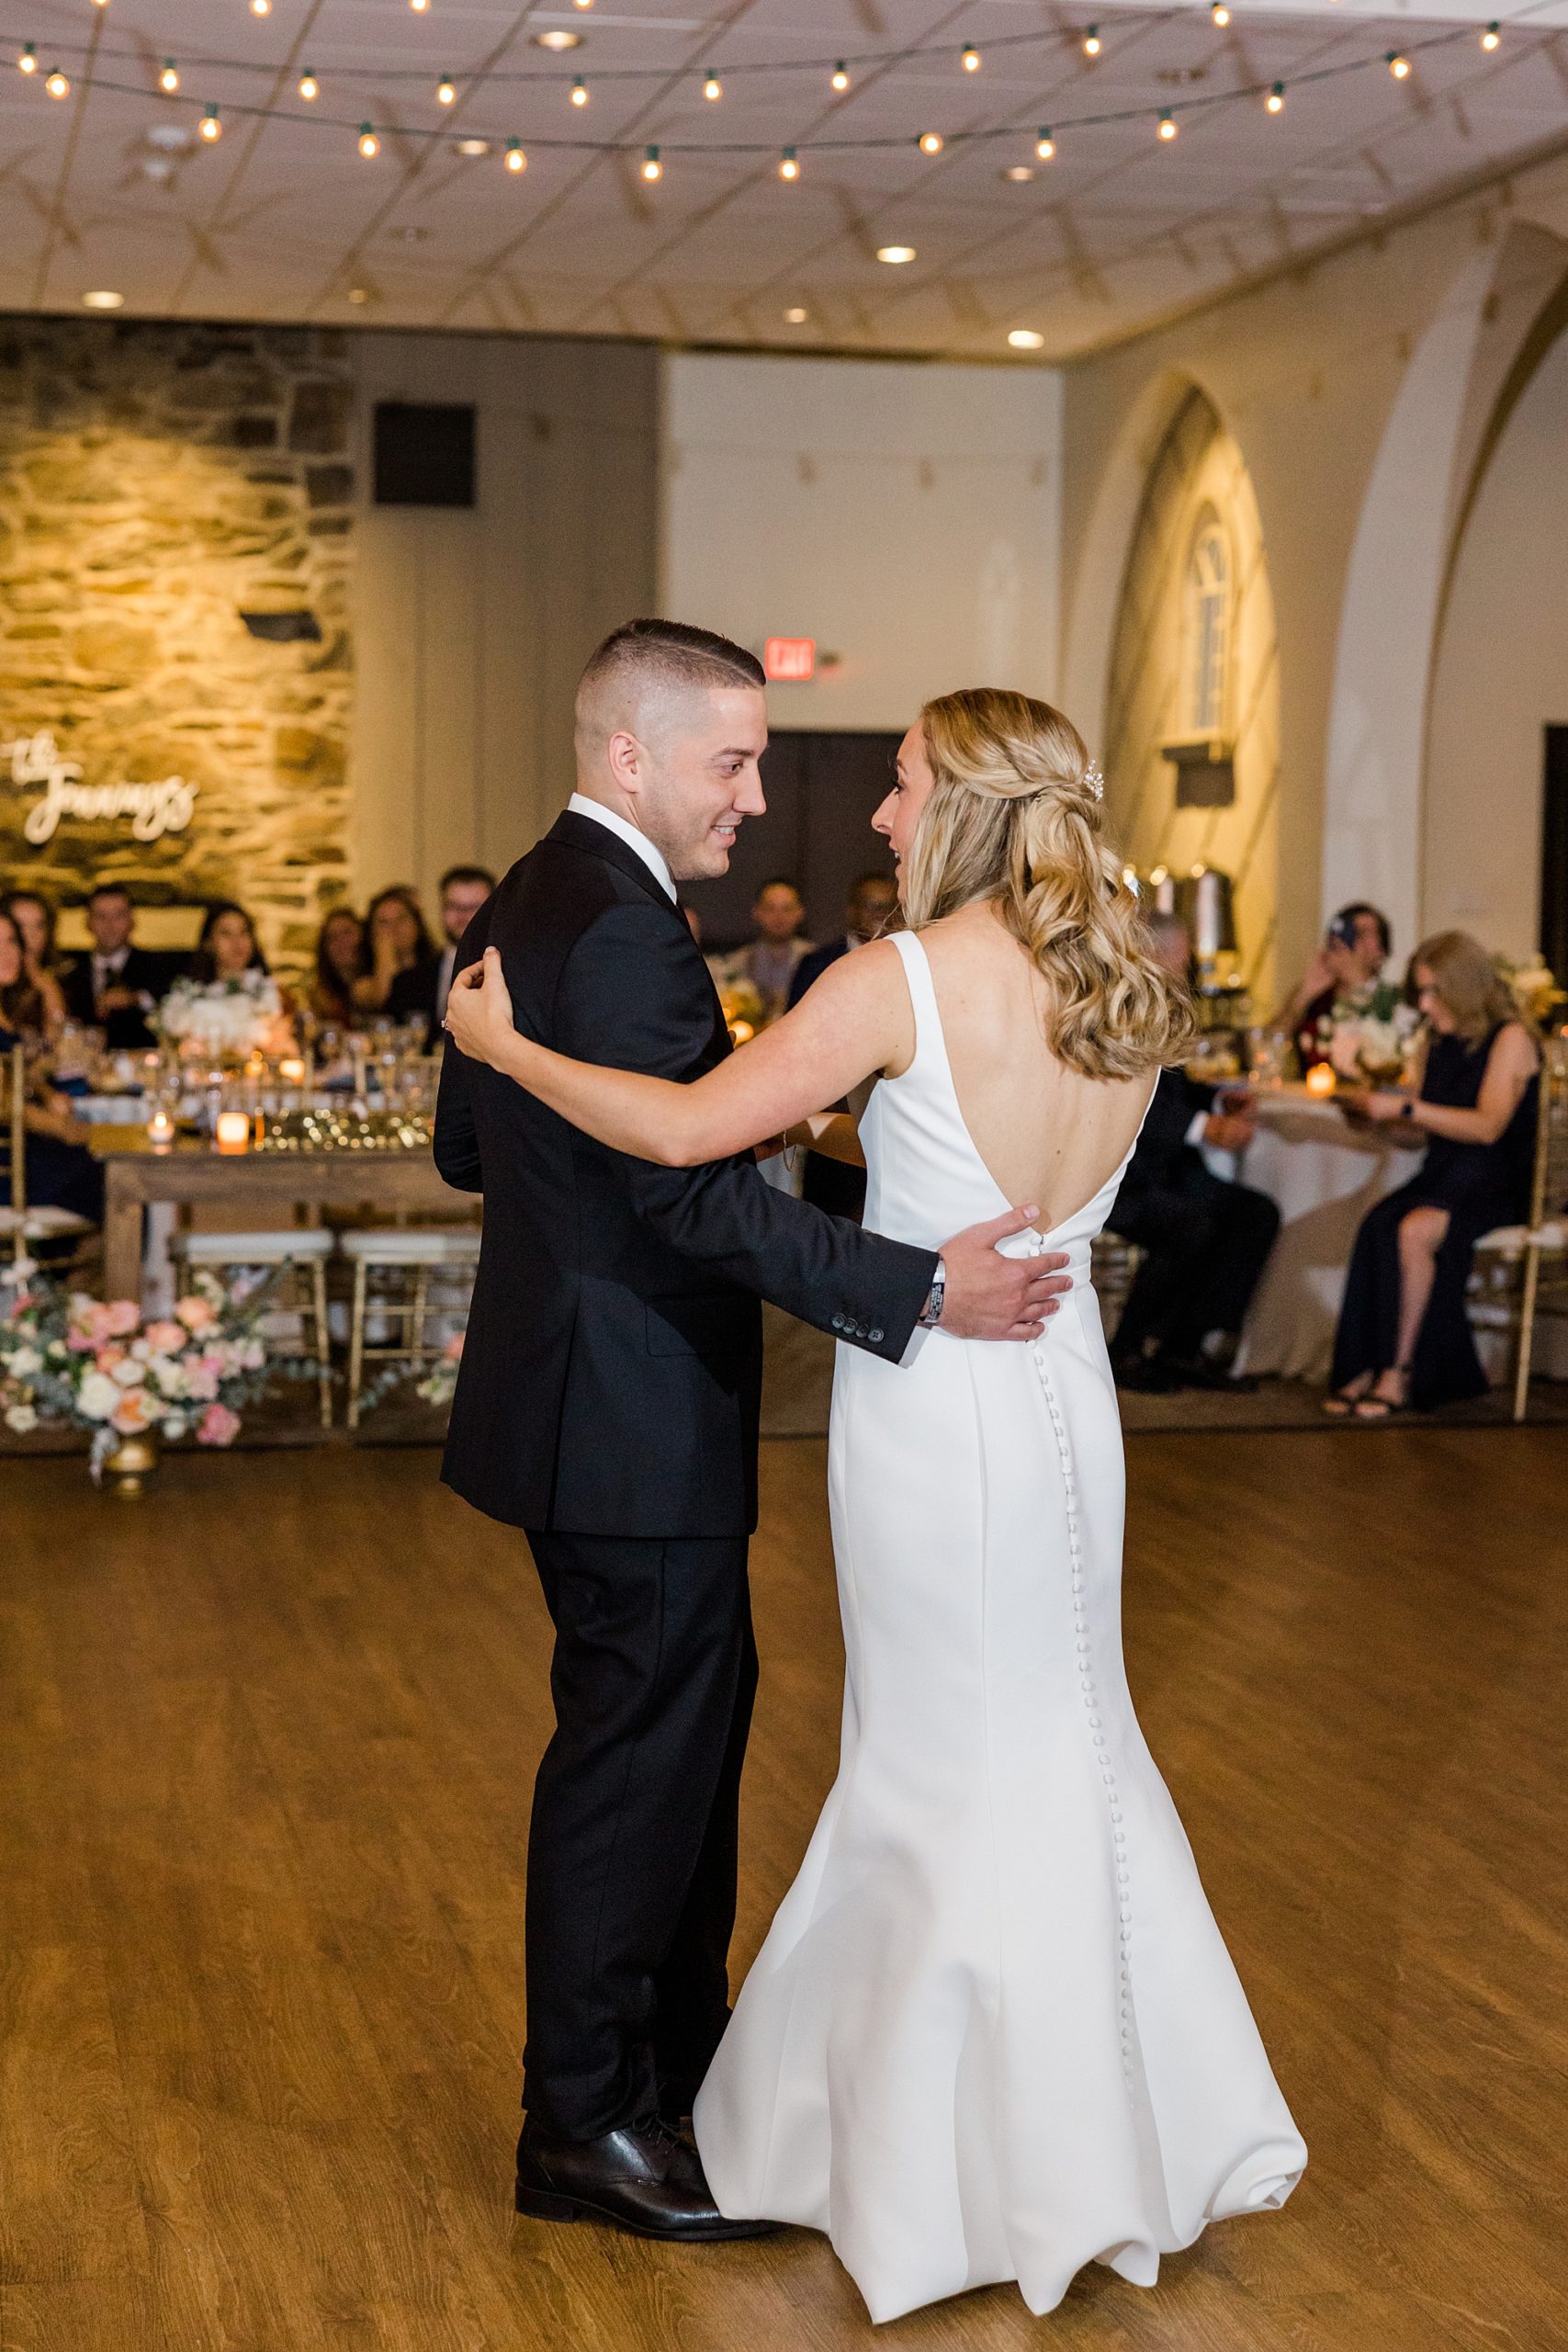 newlyweds share first dance togehter